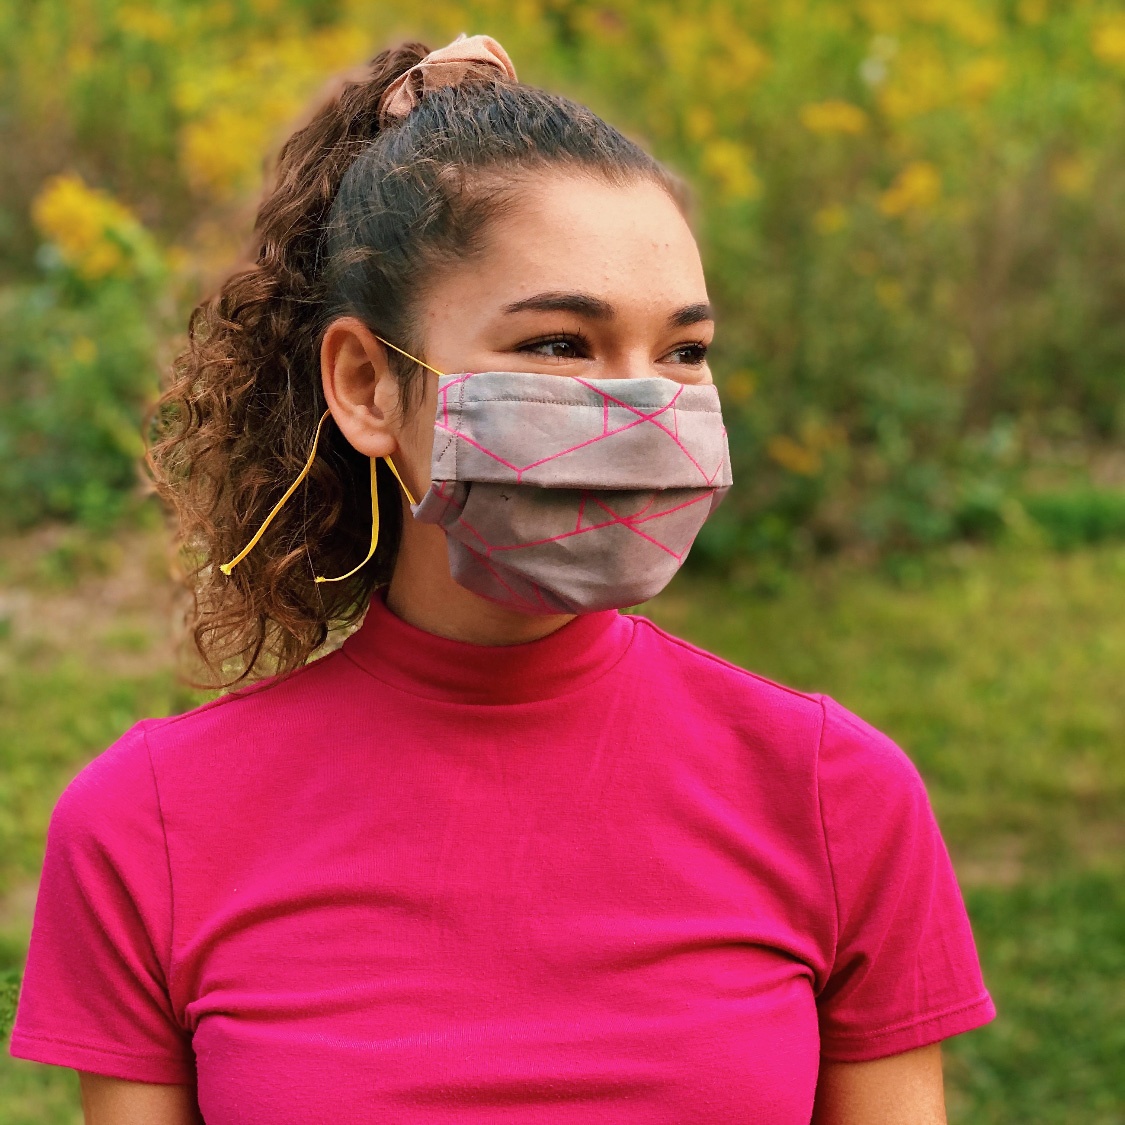 A tanned, young woman with dark hair wears a bright pink shirt and a colorful mask.